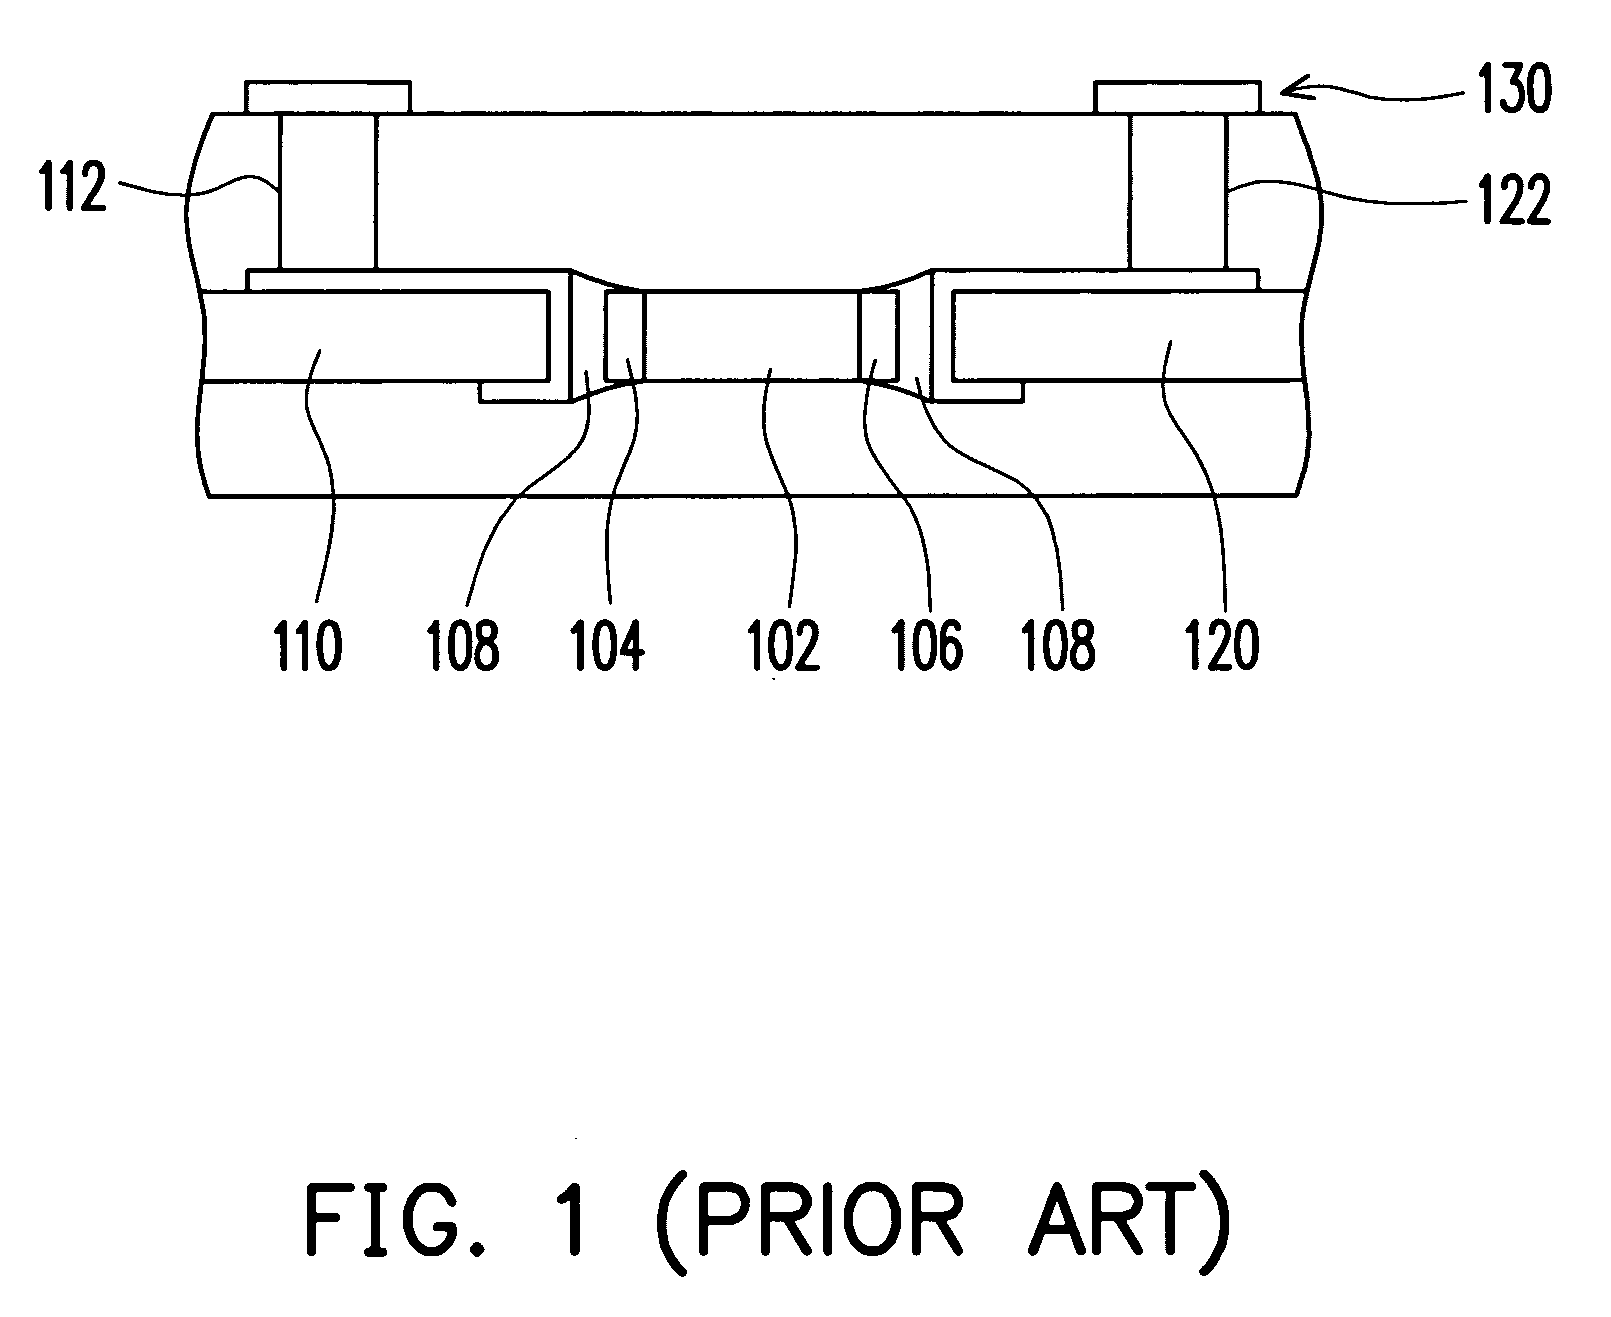 Assembly structure and method for embedded passive device